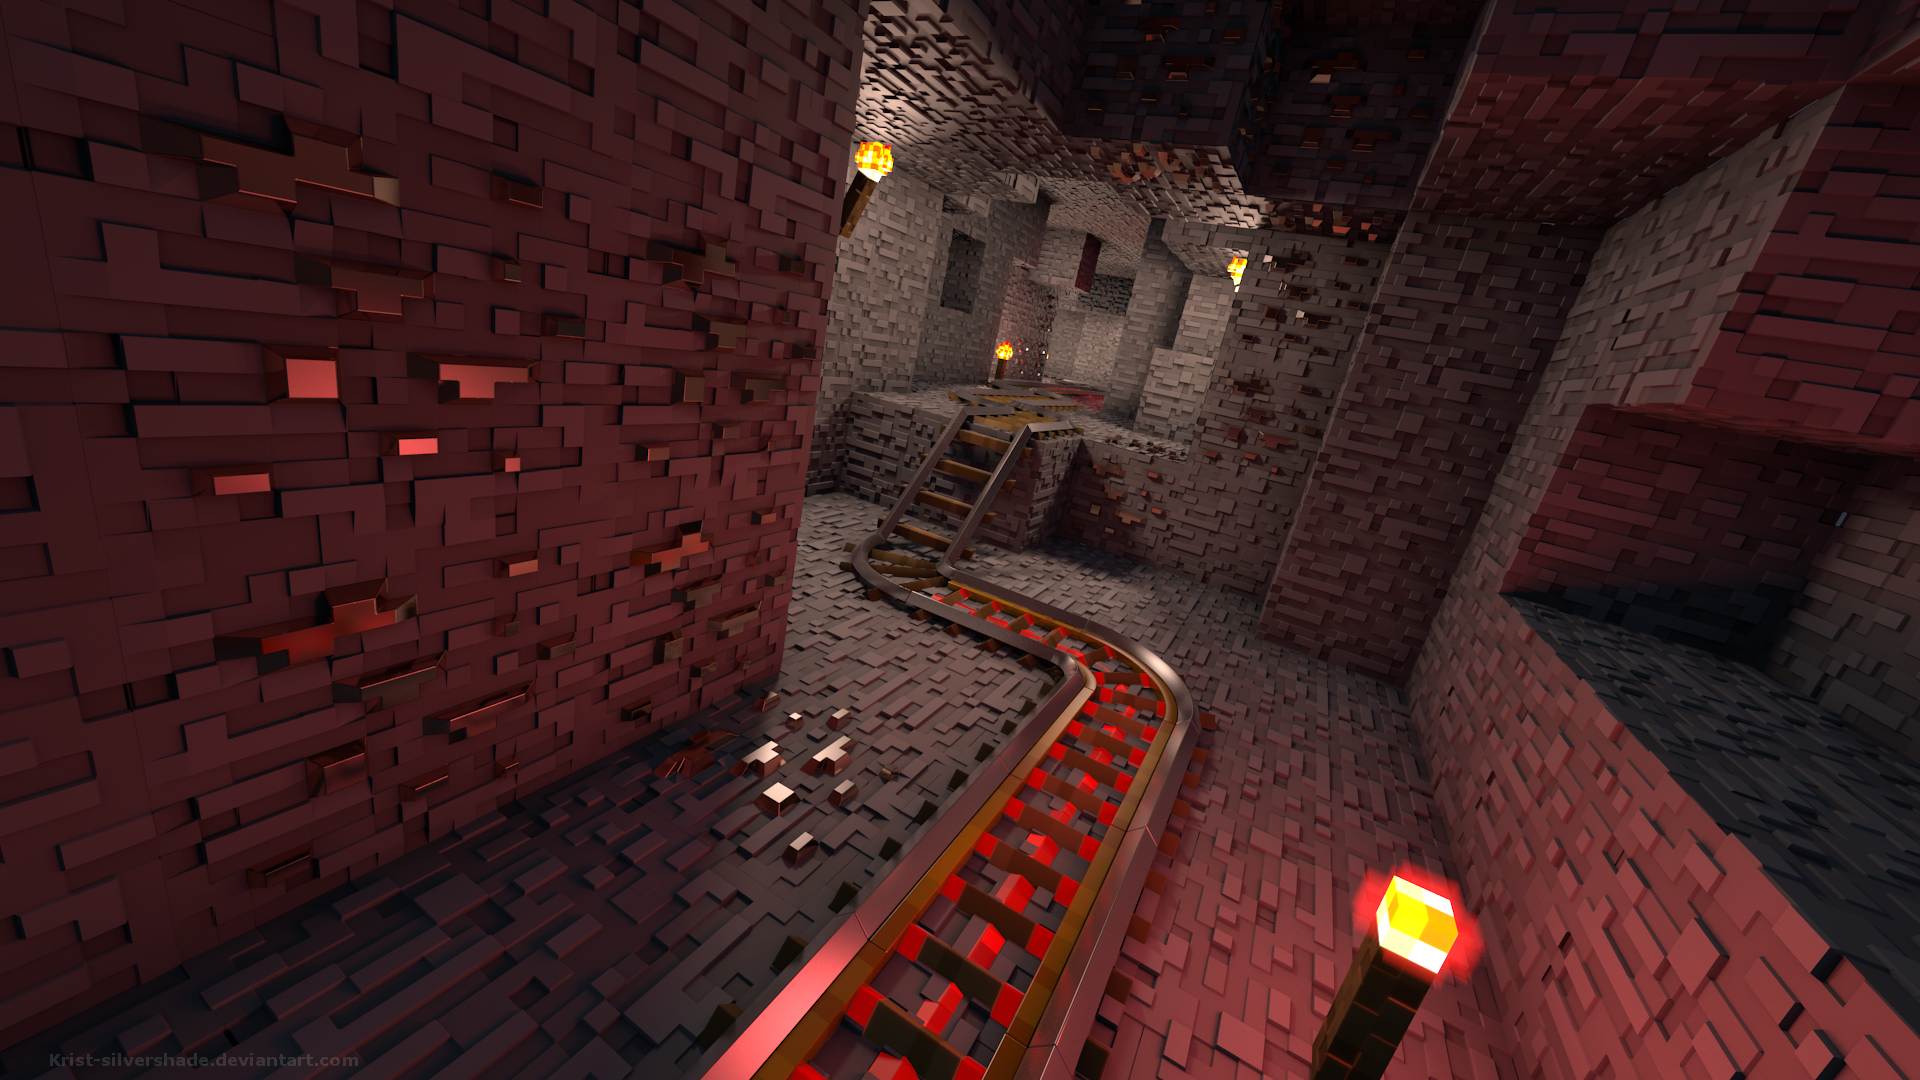 General 1920x1080 CGI video games Minecraft shaders PC gaming screen shot torches cave DeviantArt